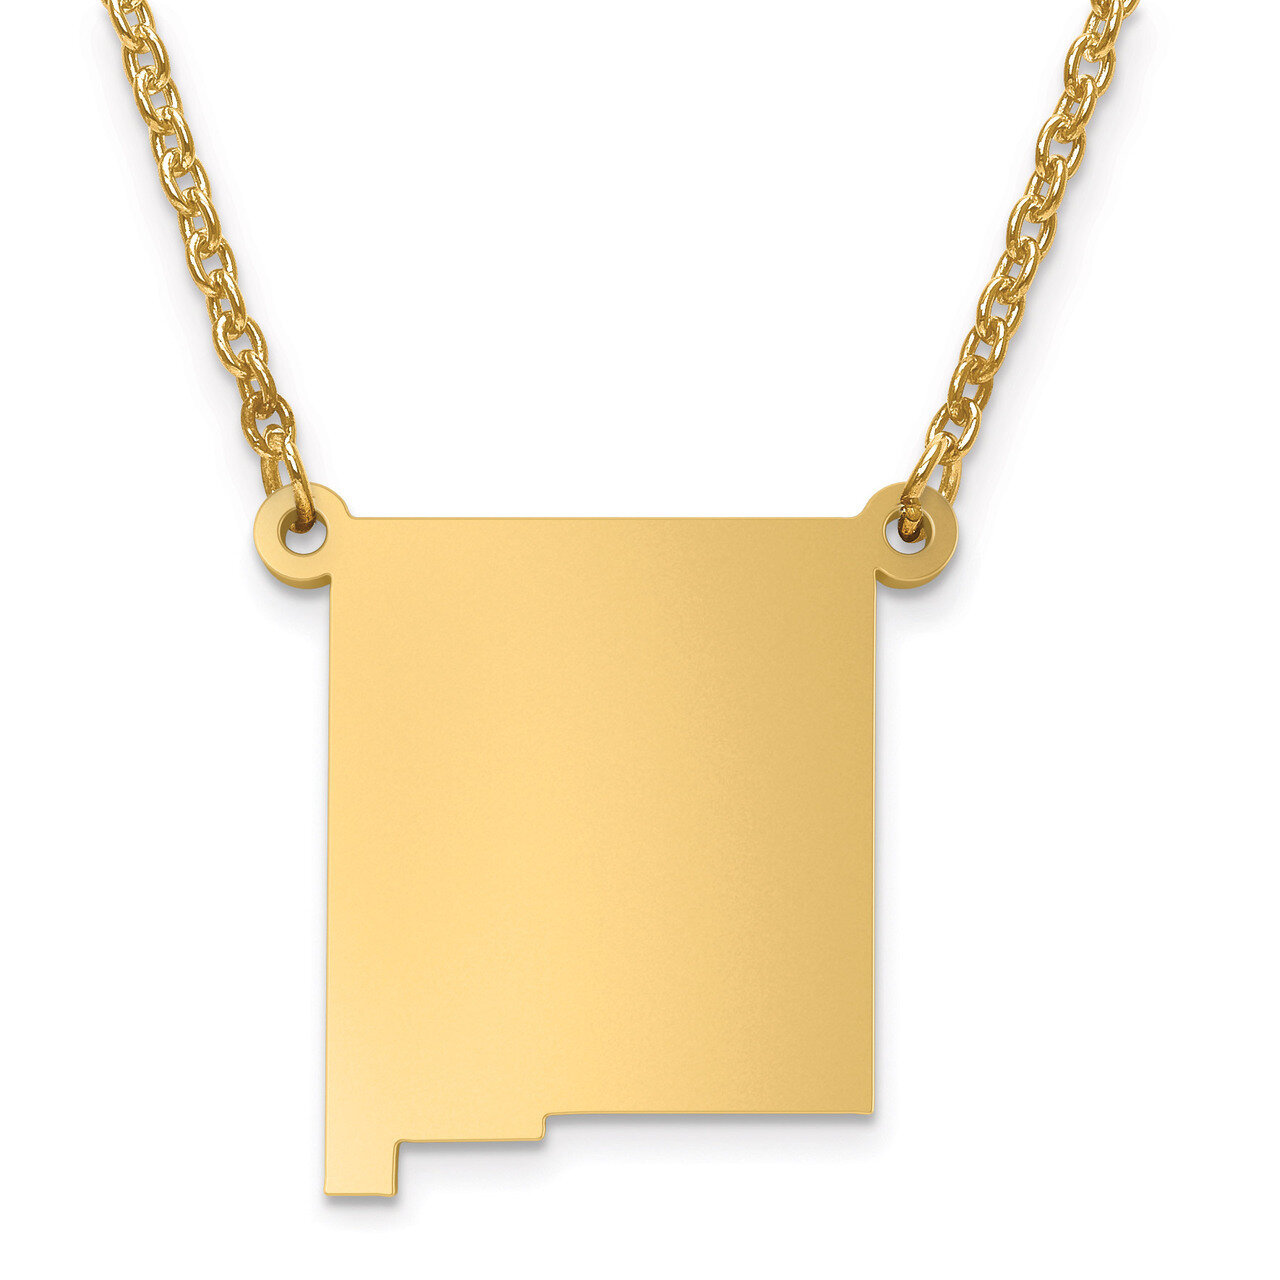 New Mexico State Pendant with Chain Engravable Gold-plated on Sterling Silver